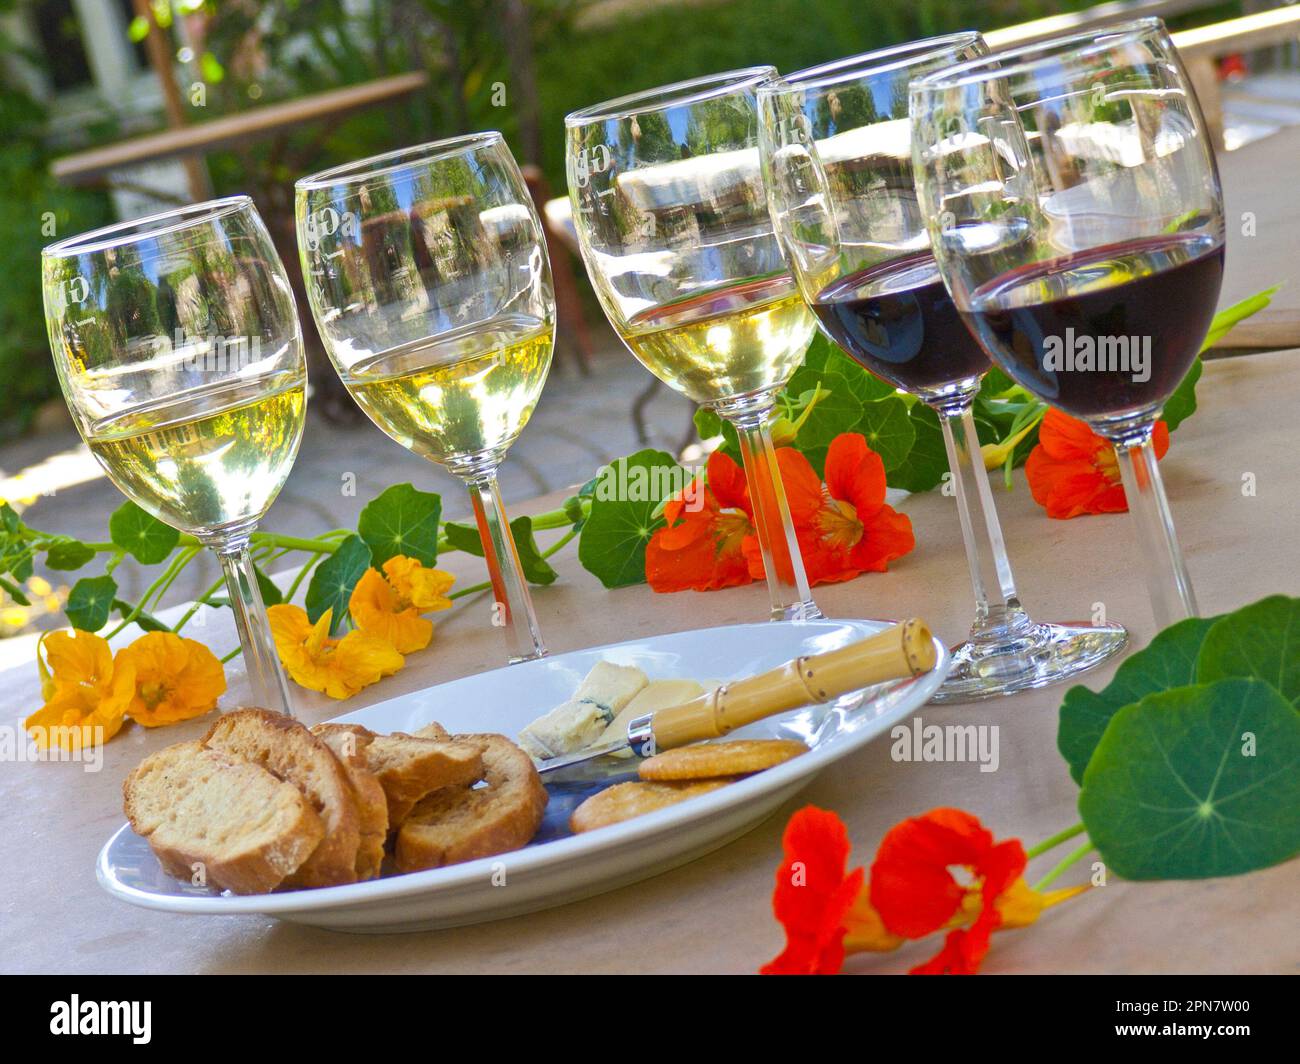 WINE TASTING CALIFORNIA FLORAL ALFRESCO  reds and whites California variety wine tasting, with cheese and toasts on attractive alfresco floral Californian winery cellar cave tasting table, with local vineyard flowers California USA Stock Photo